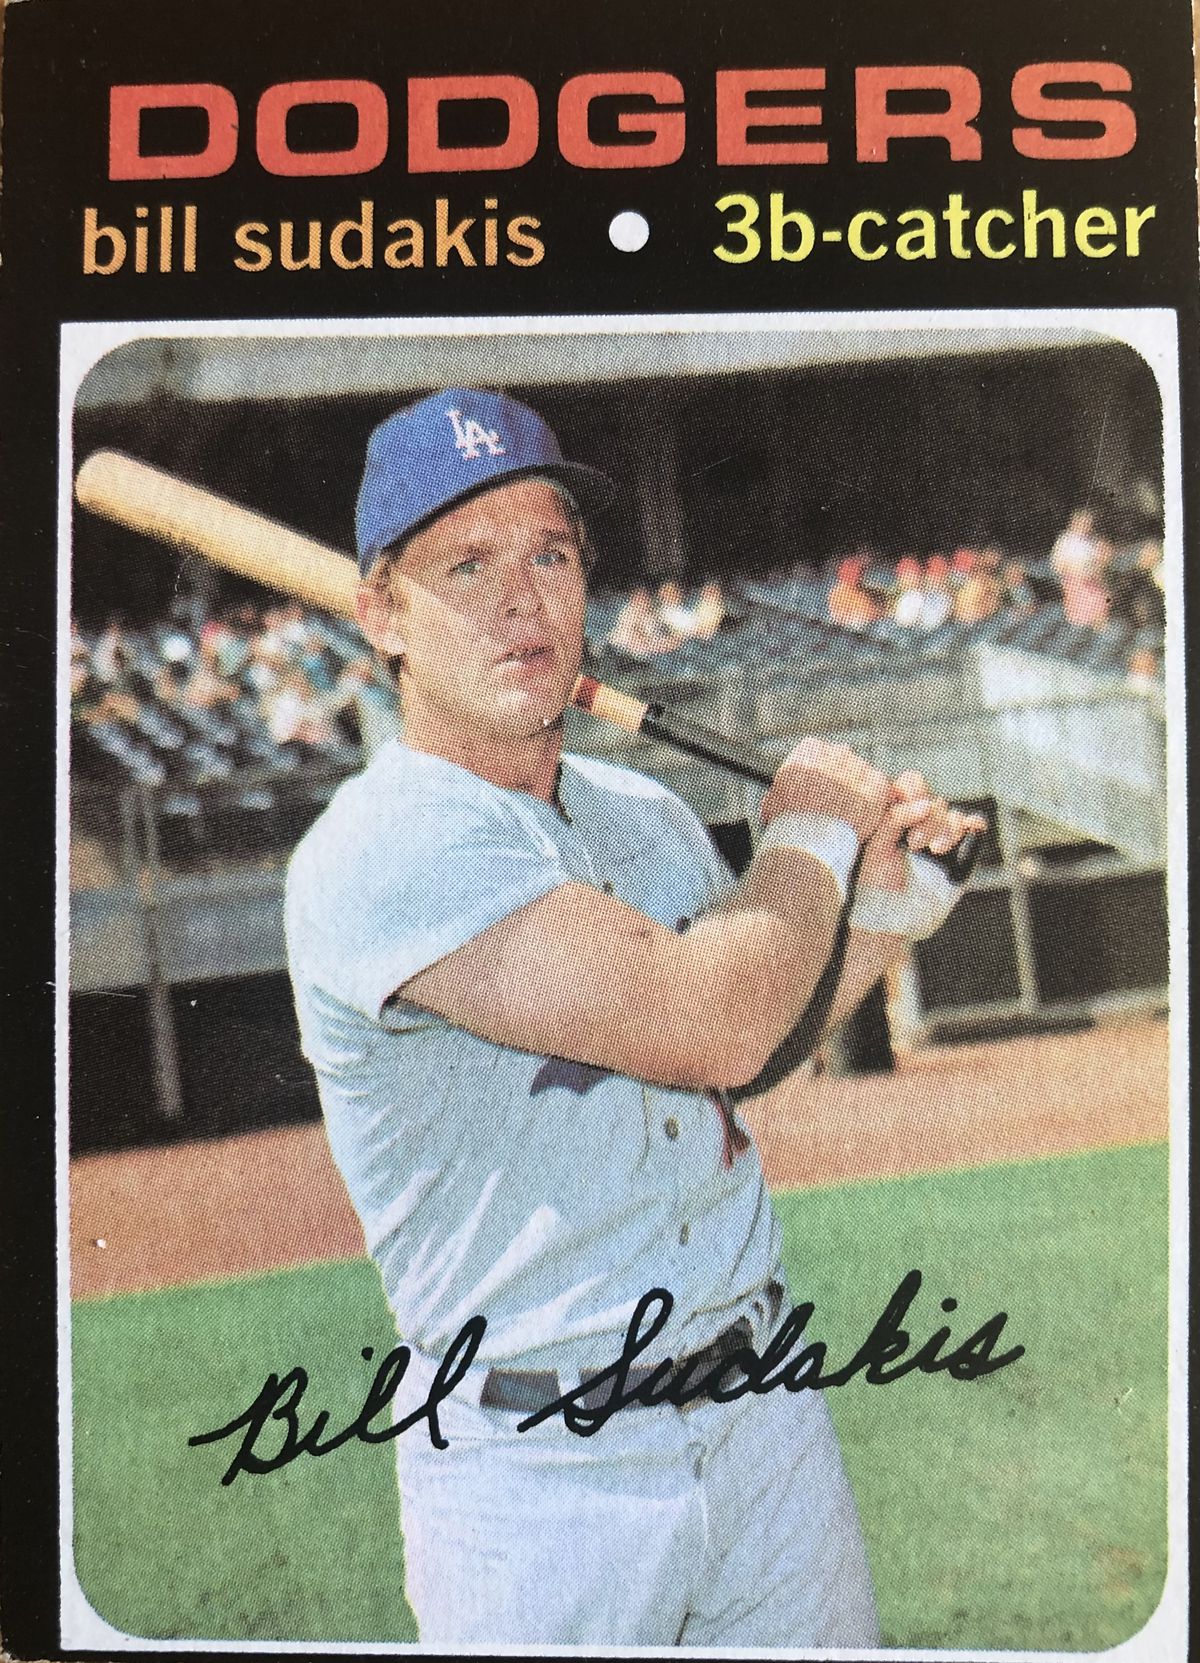 “3b-catcher” is always fun to see on a baseball card, like this 1971 Topps Bill Sudakis.